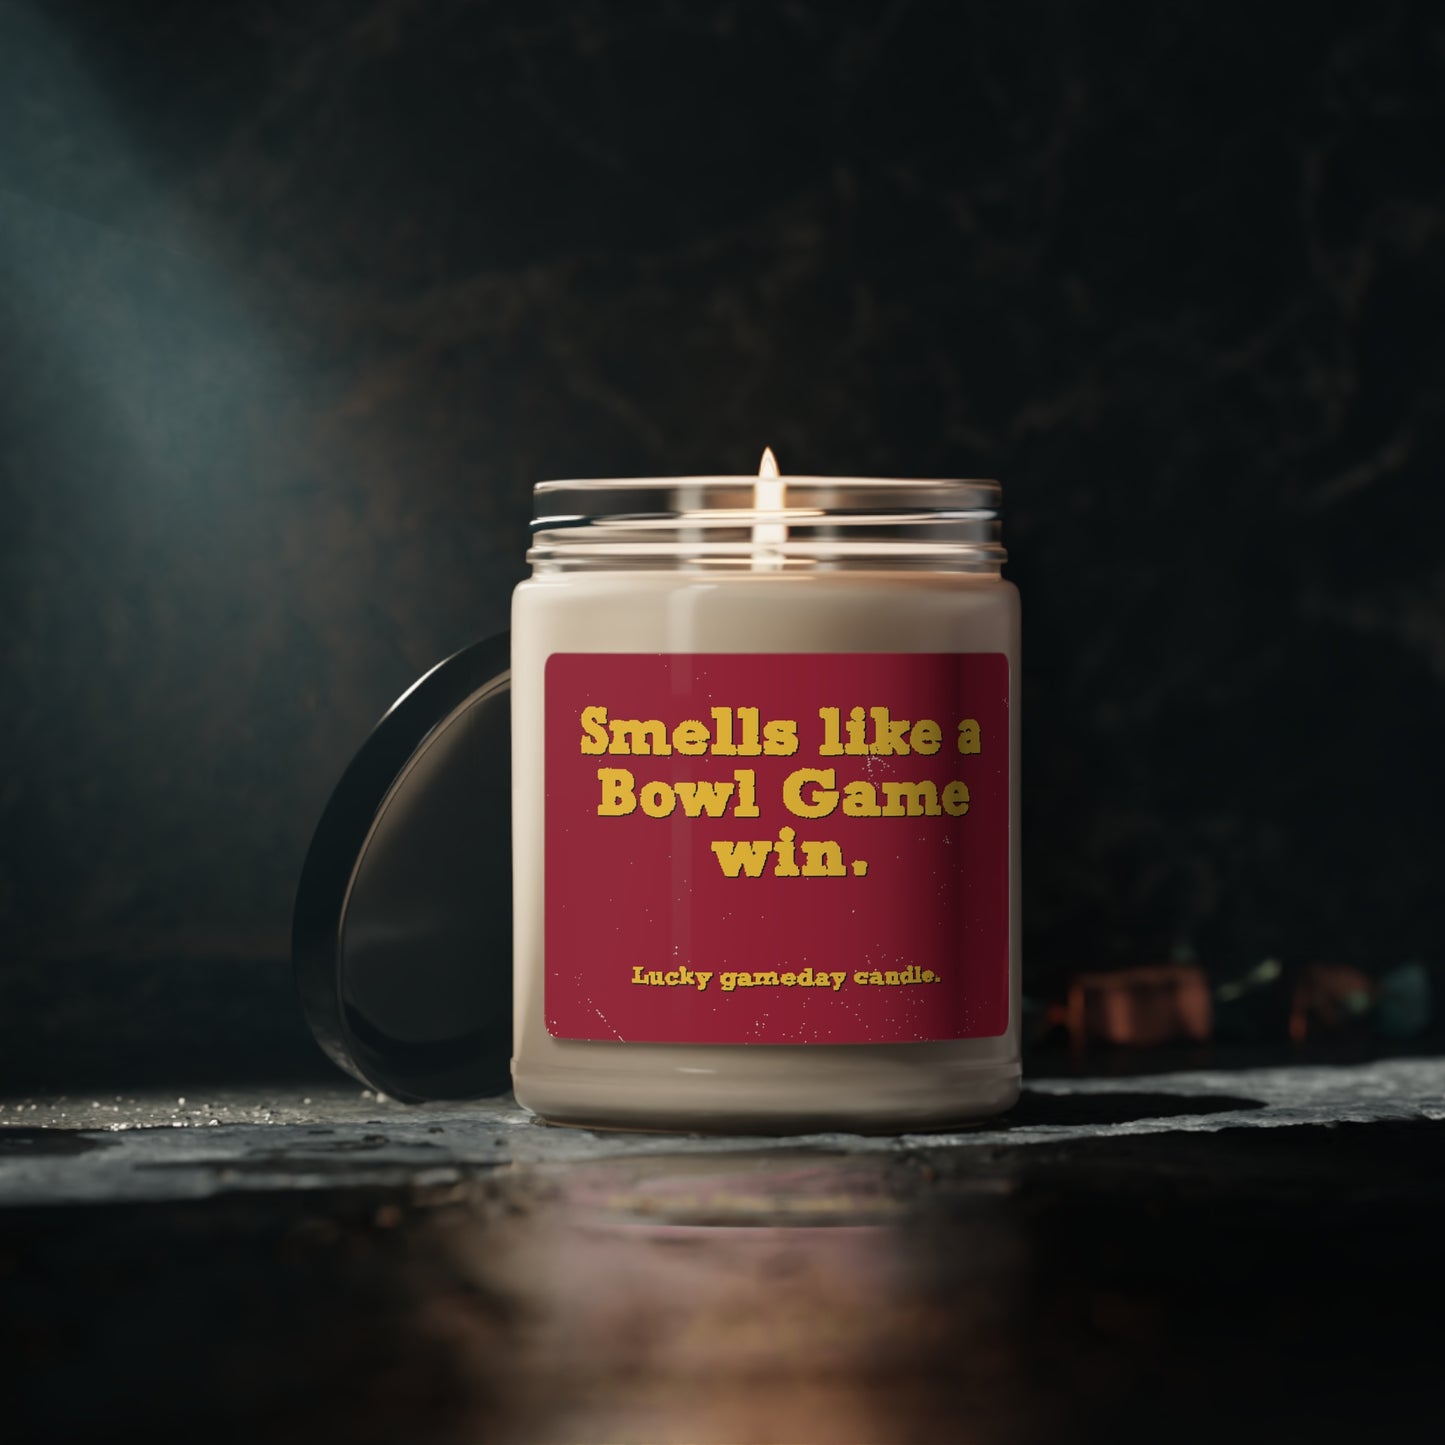 USC - "Smells Like a Bowl Game Win" Scented Candle